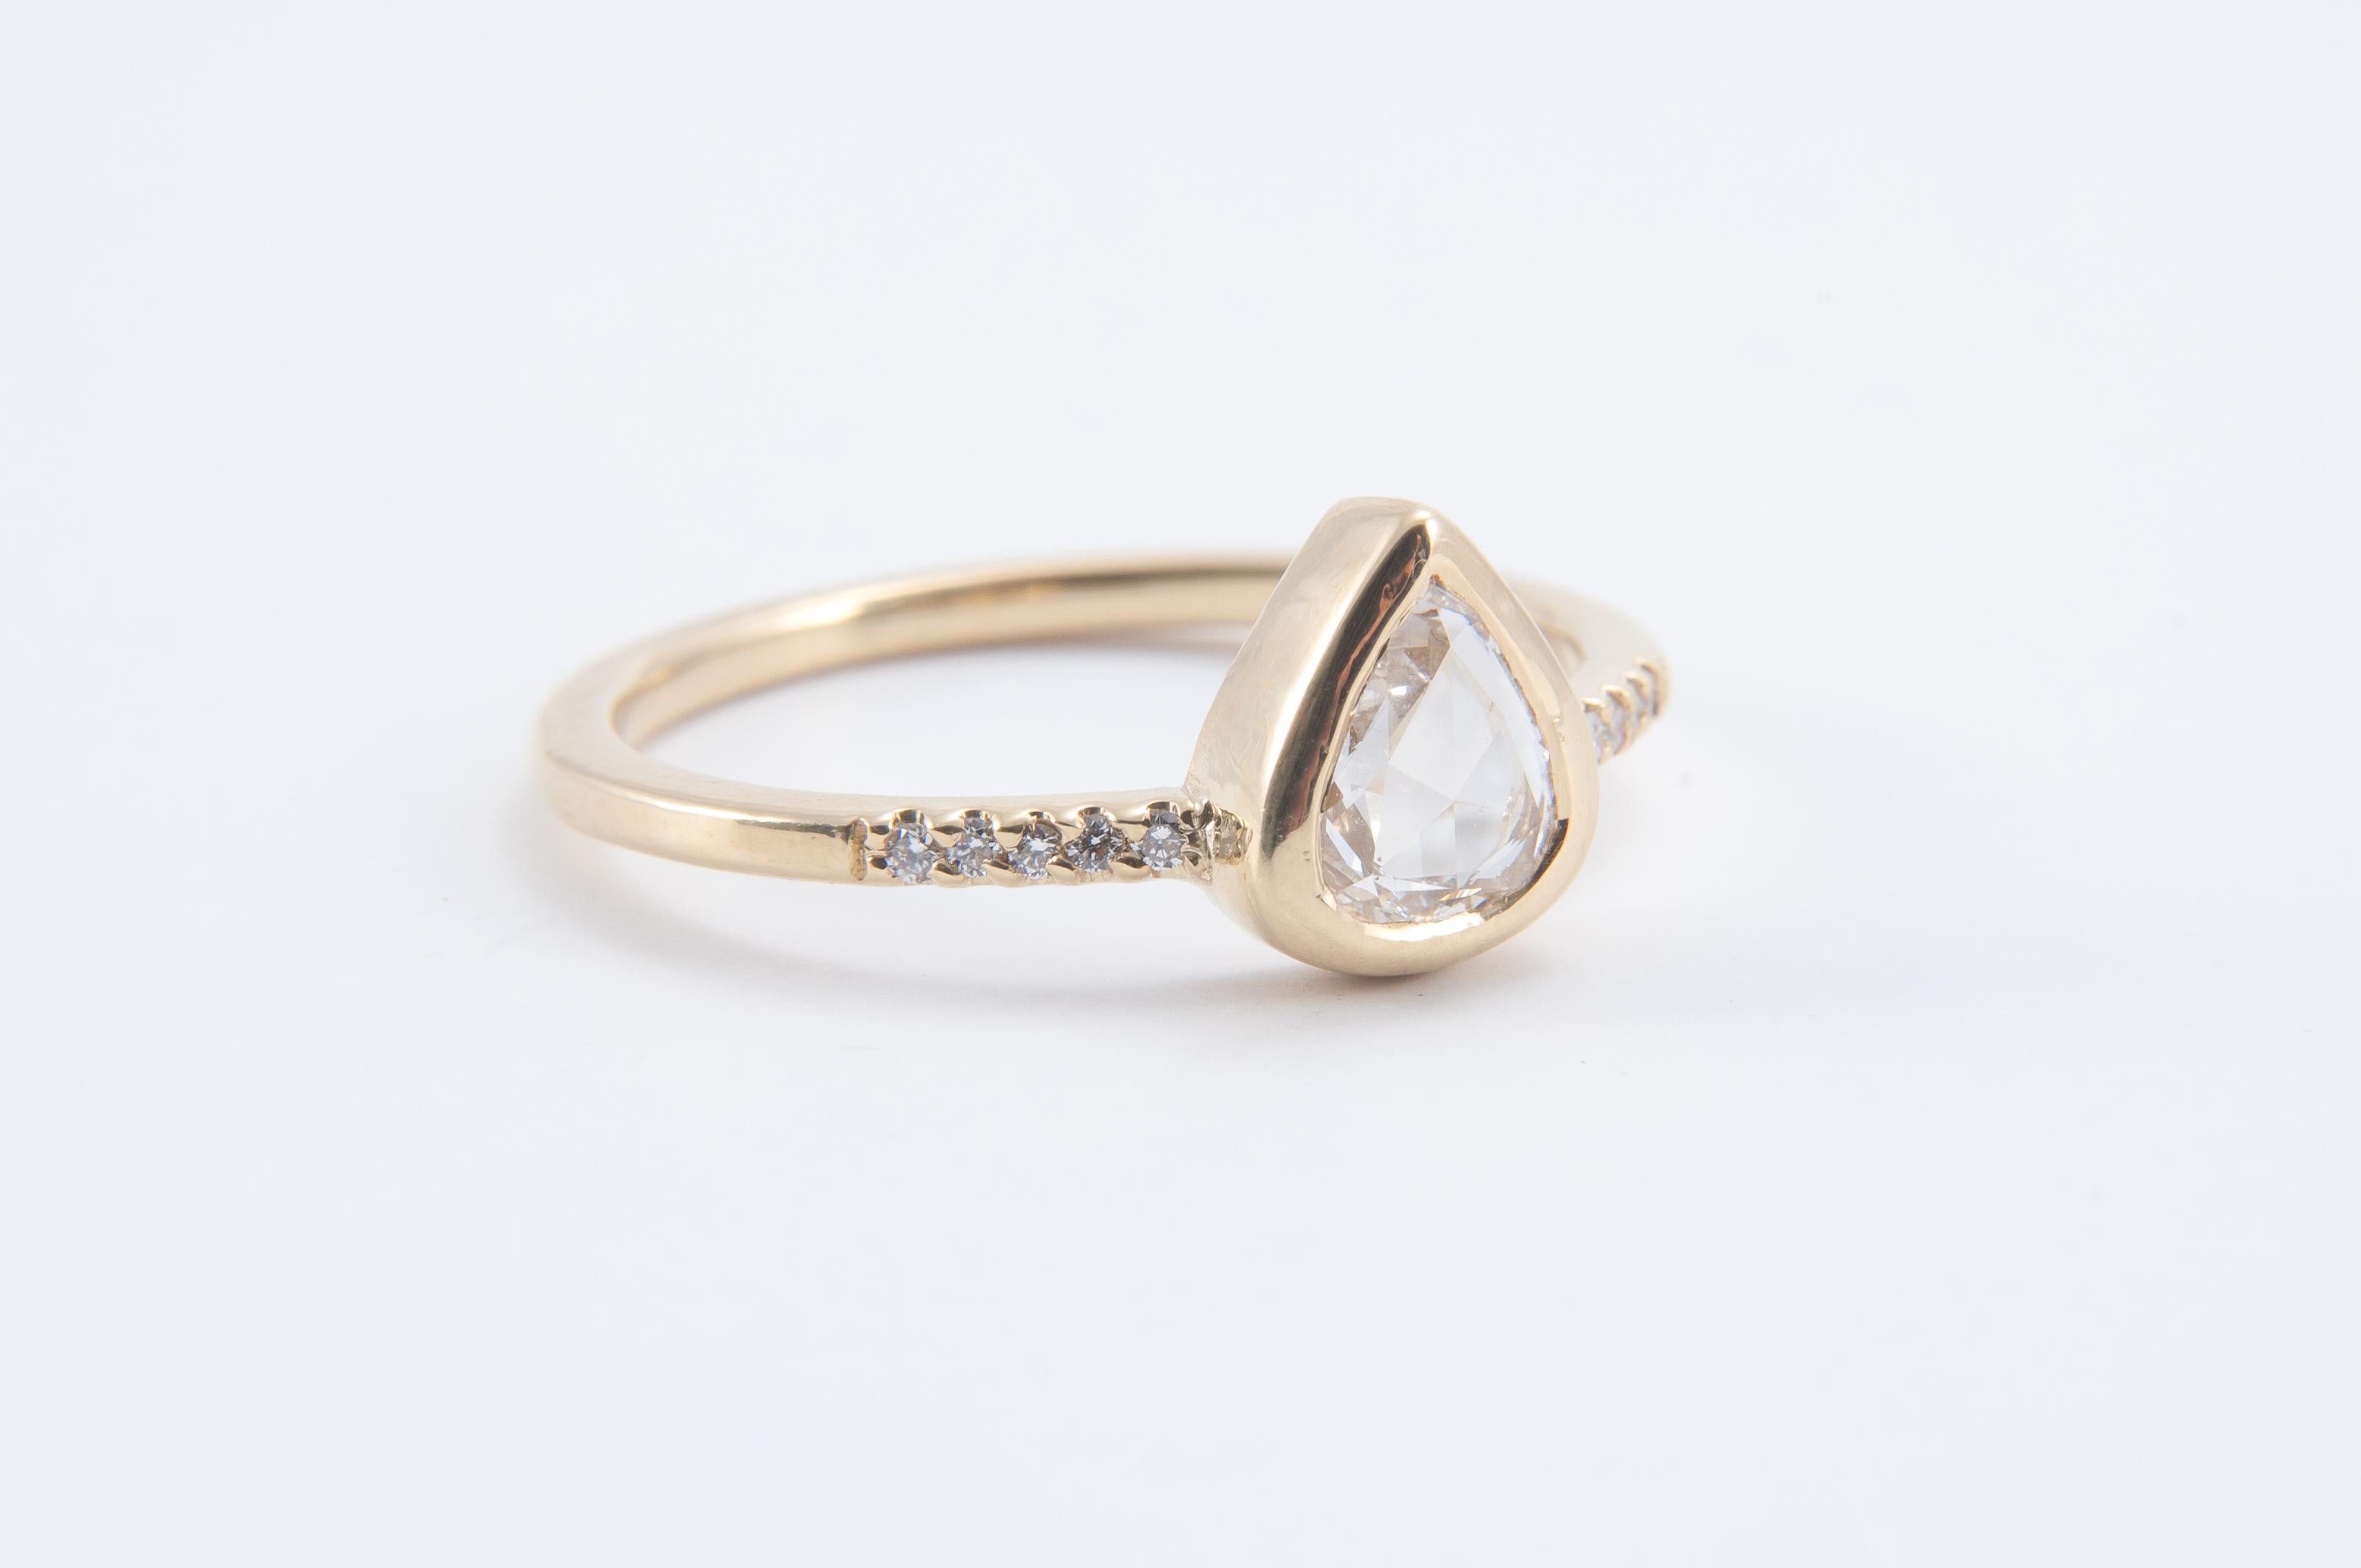 A stunning pear-shaped champagne diamond sits between glistening pave set white diamonds.

Perfect on its own as a subtle statement piece or stacked.

18K yellow gold band featuring a central 0.60ct pale champagne rose cut diamond set between 0.06ct